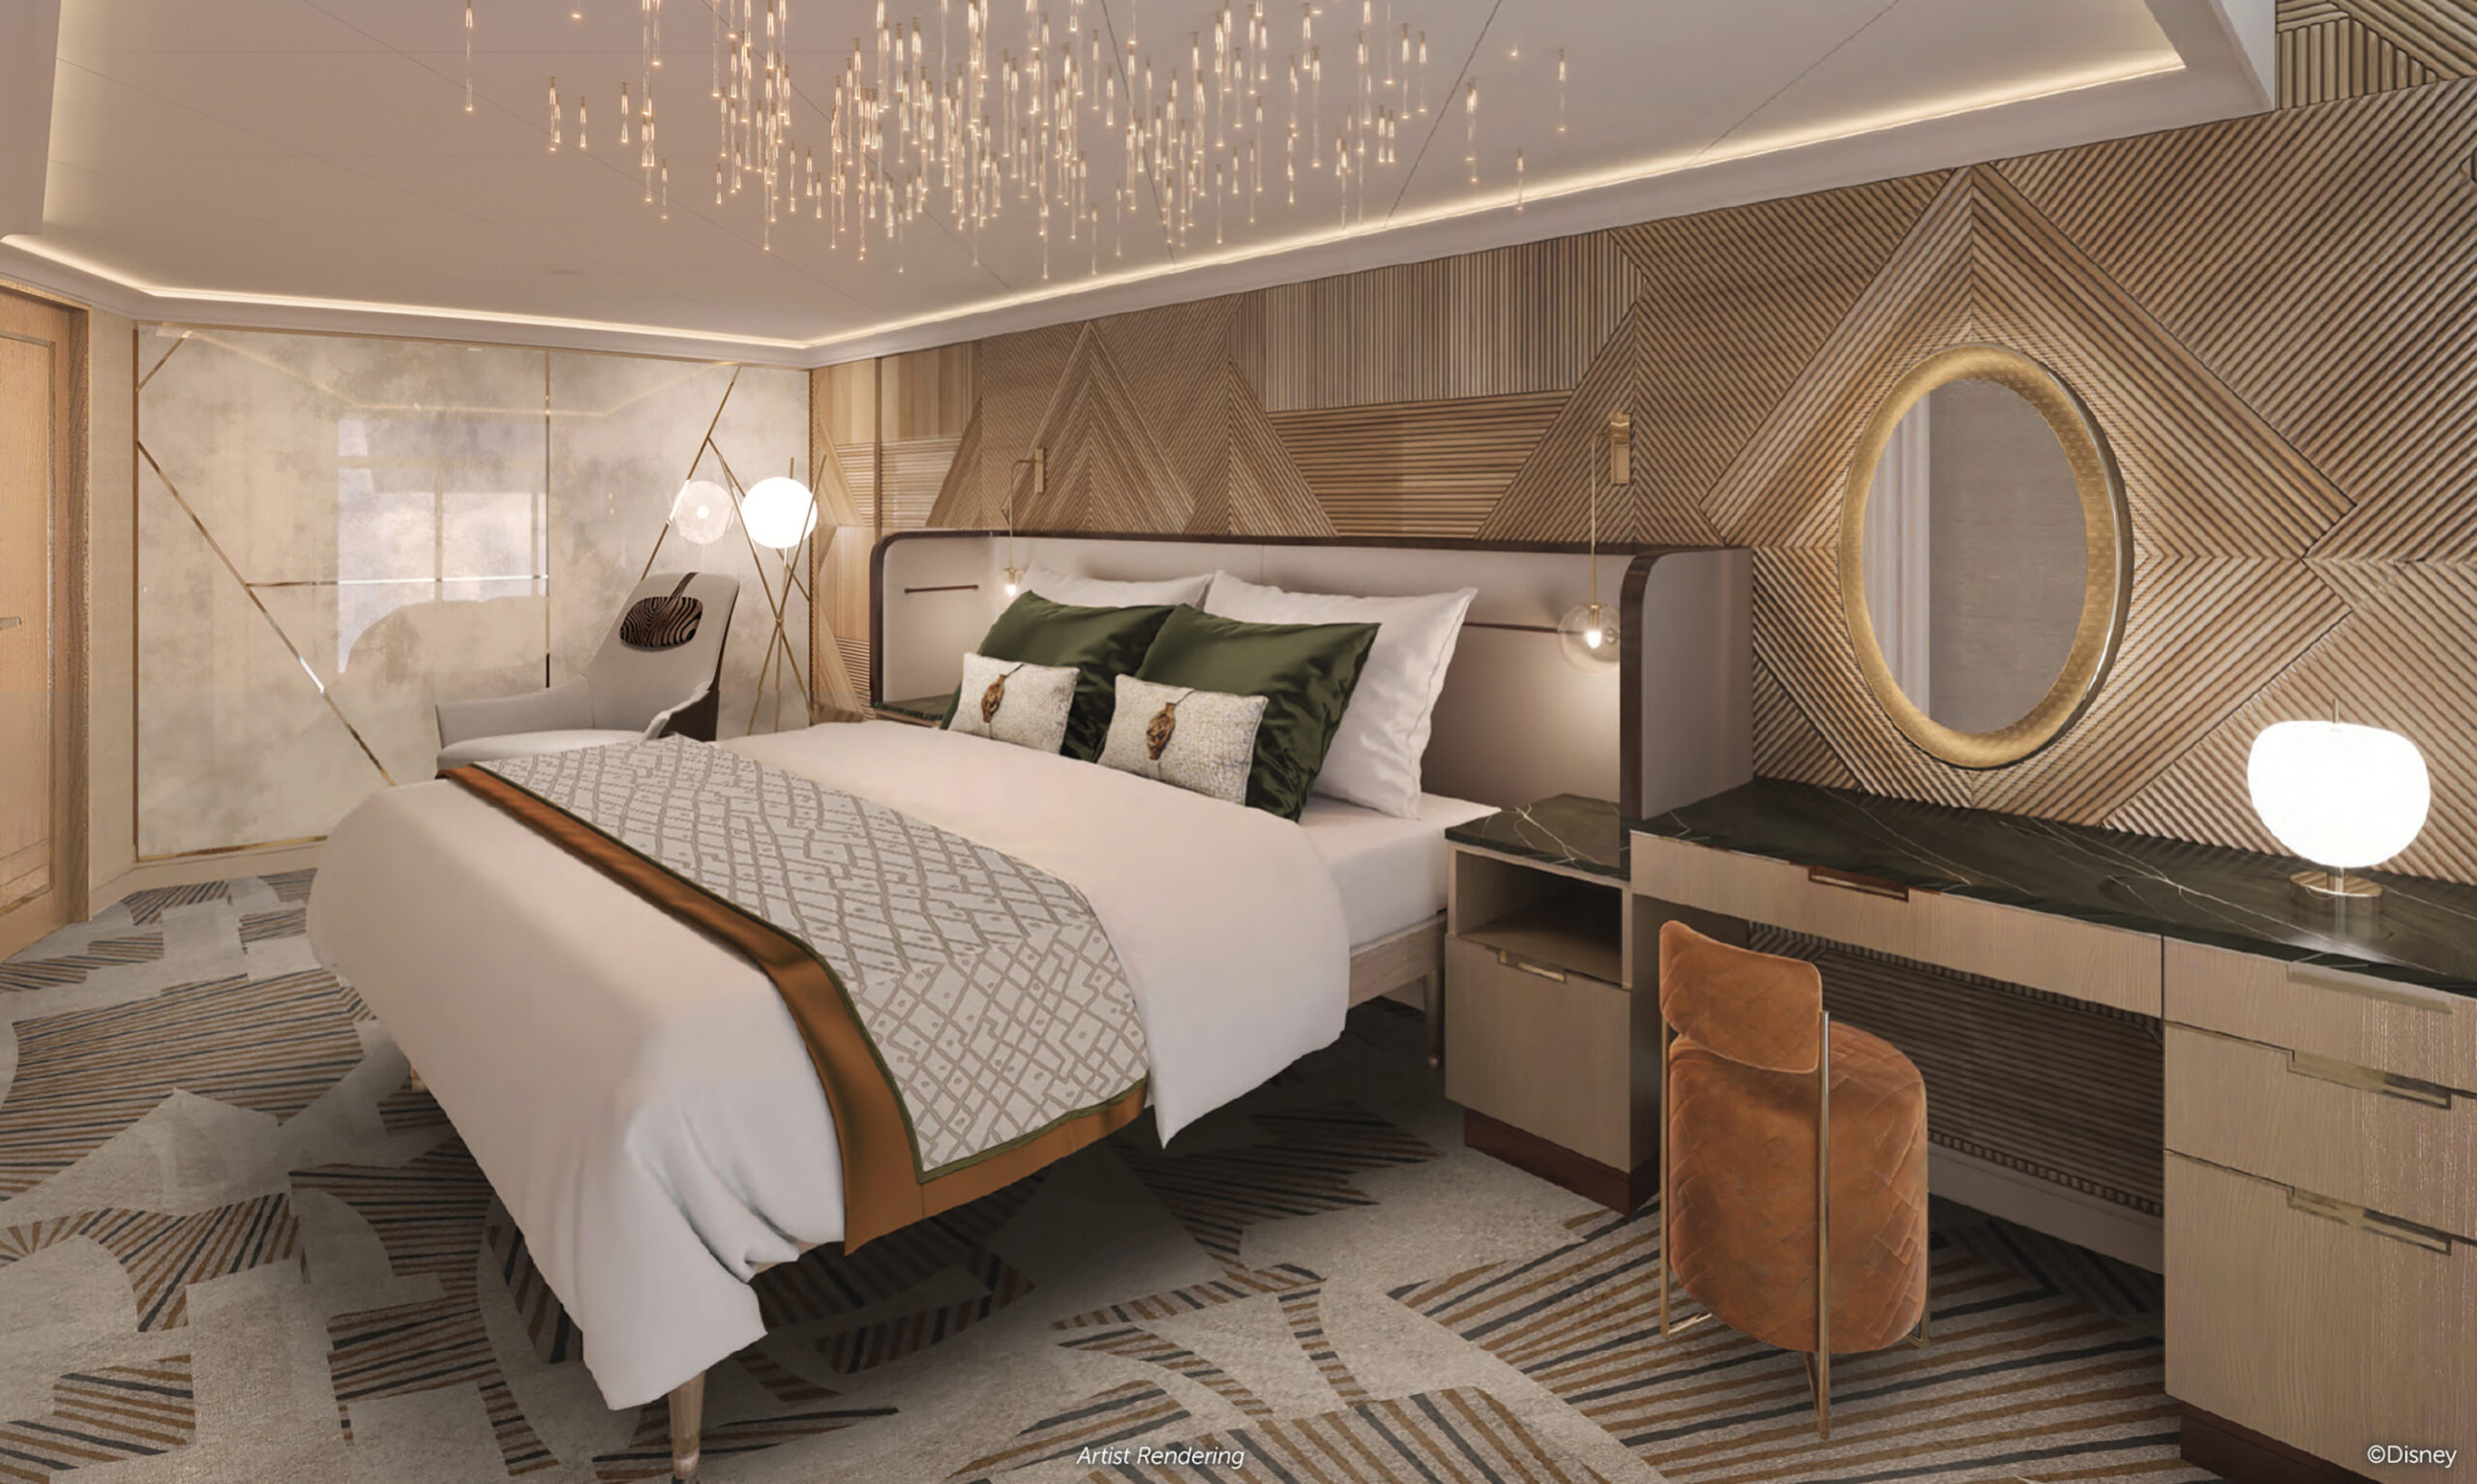 The adventure-inspired accommodations aboard the Disney Treasure will extend to four royal suites that pay tribute to the faithful feline companions of daring Disney characters. The upscale designs include the Bagheera Royal Suites, honoring the noble panther from “The Jungle Book” and the lush forests he calls home. (Disney)